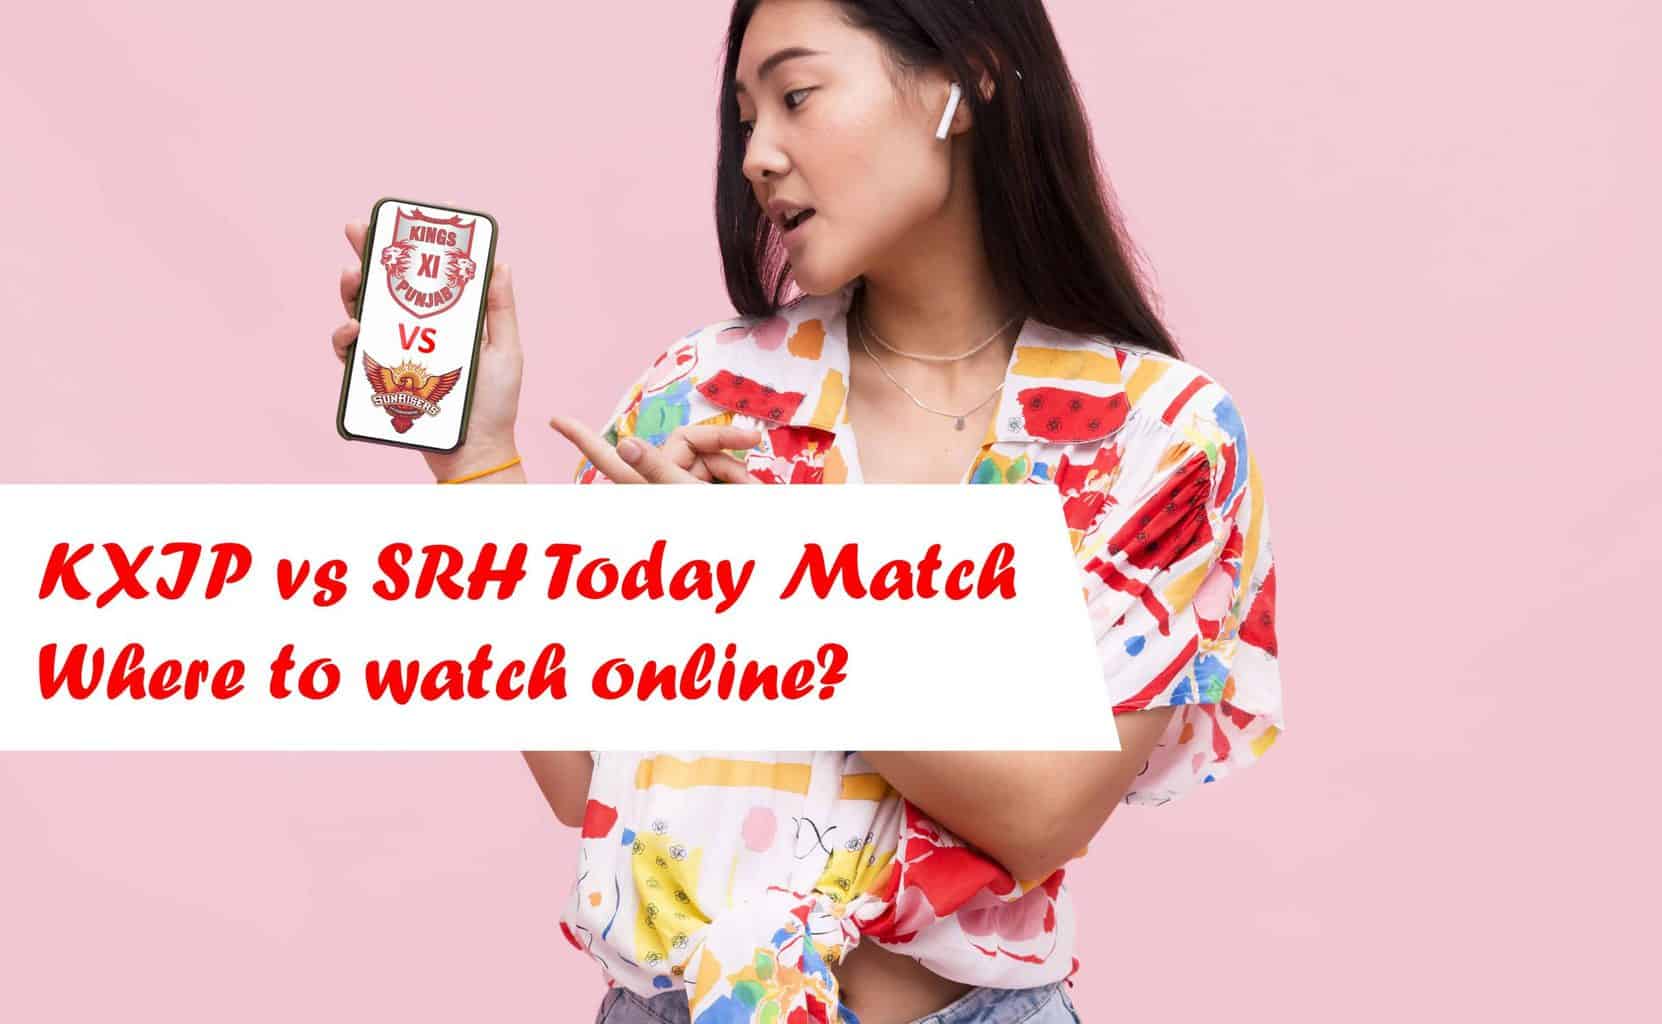 IPL 2020 KXIP vs SRH Live Match, Where to Watch on Laptop and Mobile for Free